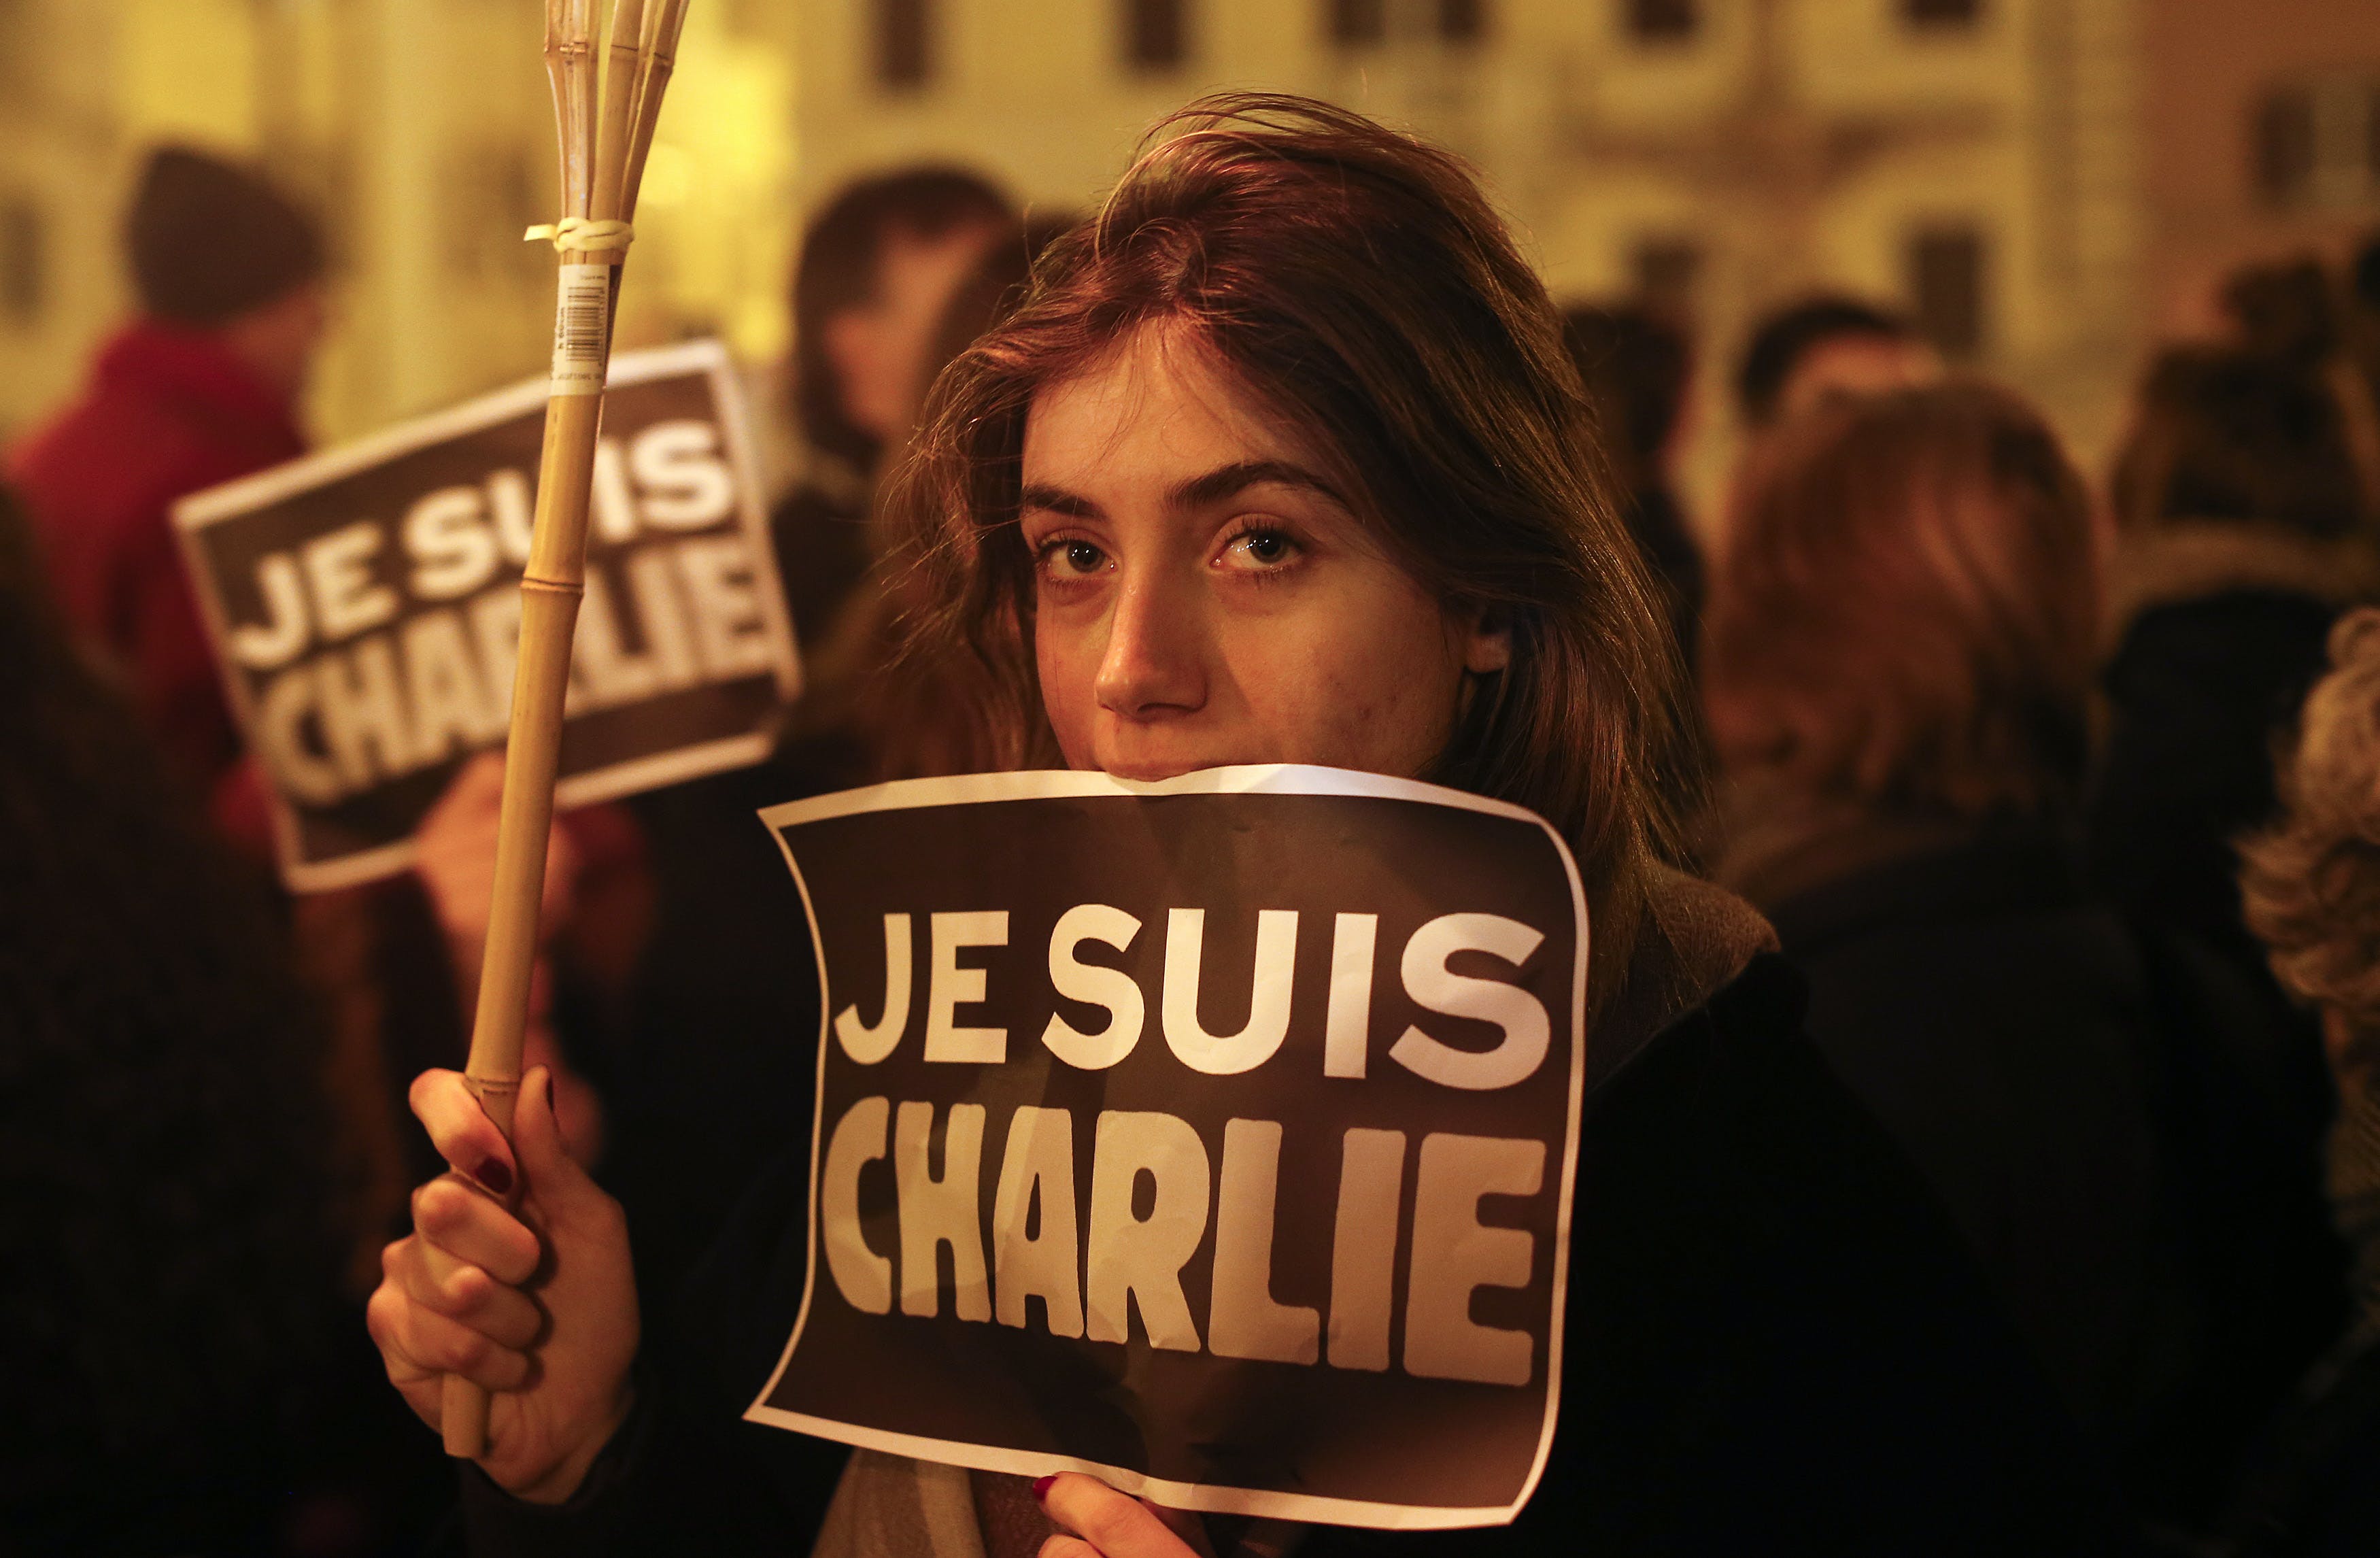 A woman holds a placard reading "I am Charlie" to pay tribute to the victims following a shooting by gunmen at the offices of weekly newspaper Charlie Hebdo in Paris in front of the French embassy in 